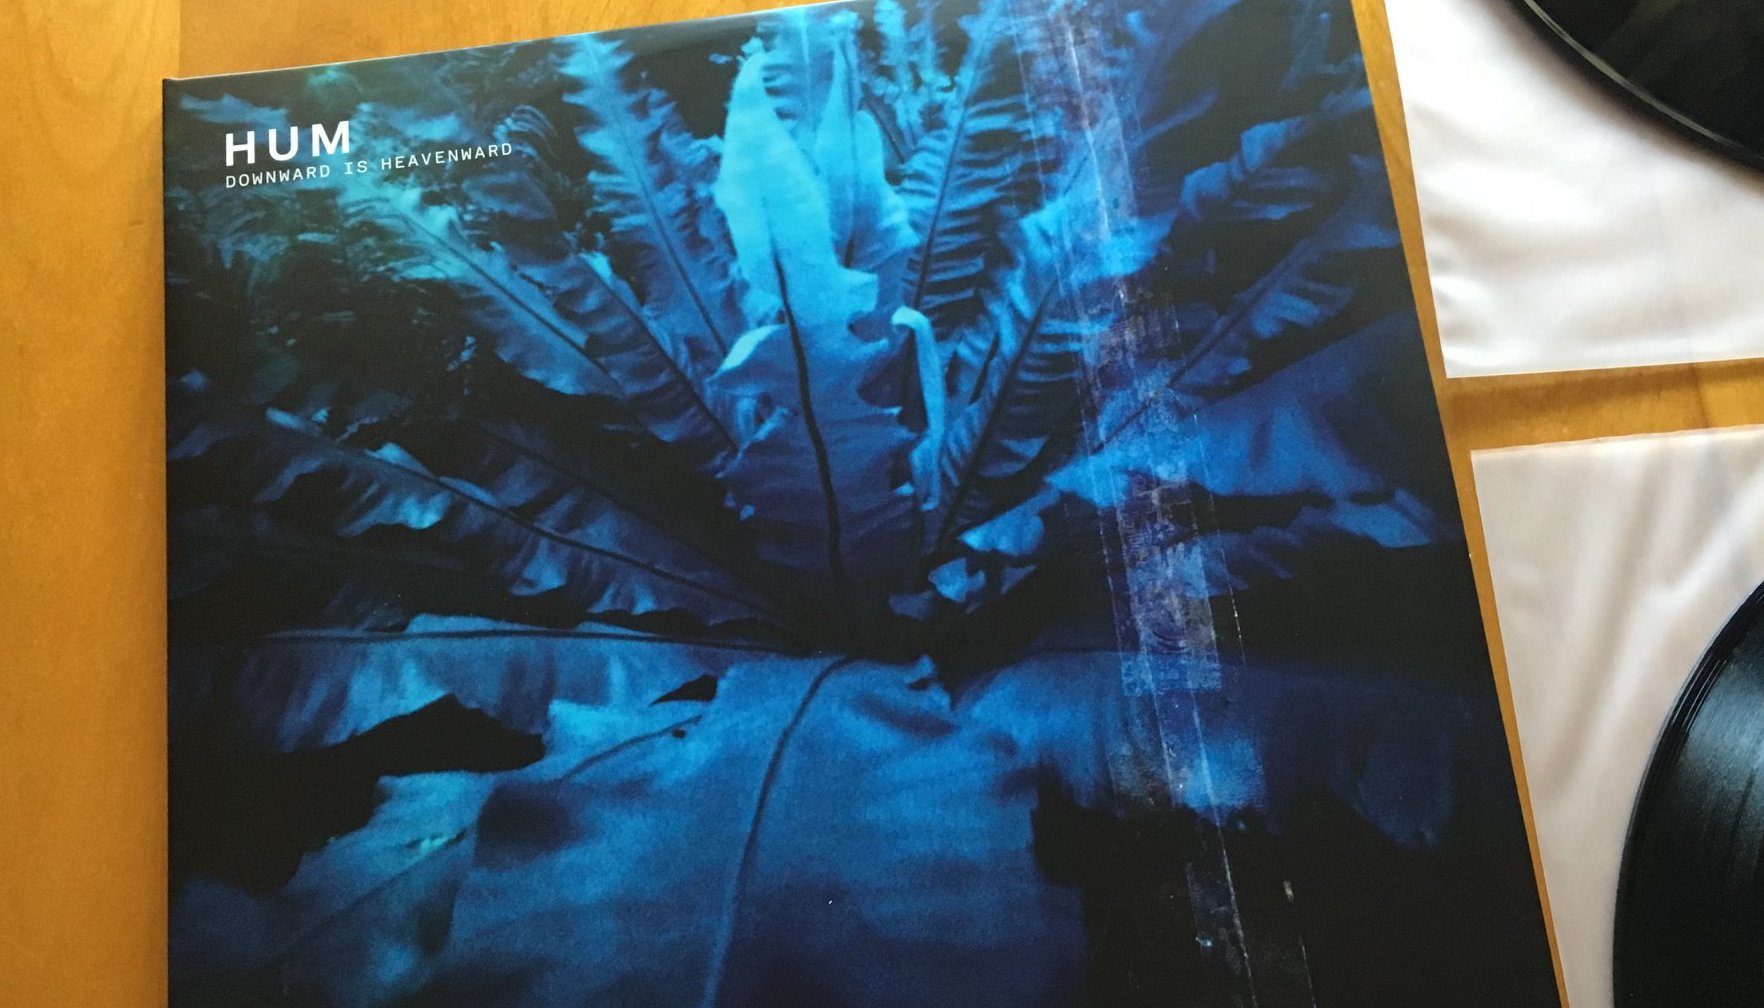 A photo of a vinyl music album on a wood table. The band Hum's albulm Downward is Heavenward shows a blue and black image of a plant. To the right of the album are snippets of two black vinyl records on white sleeves.